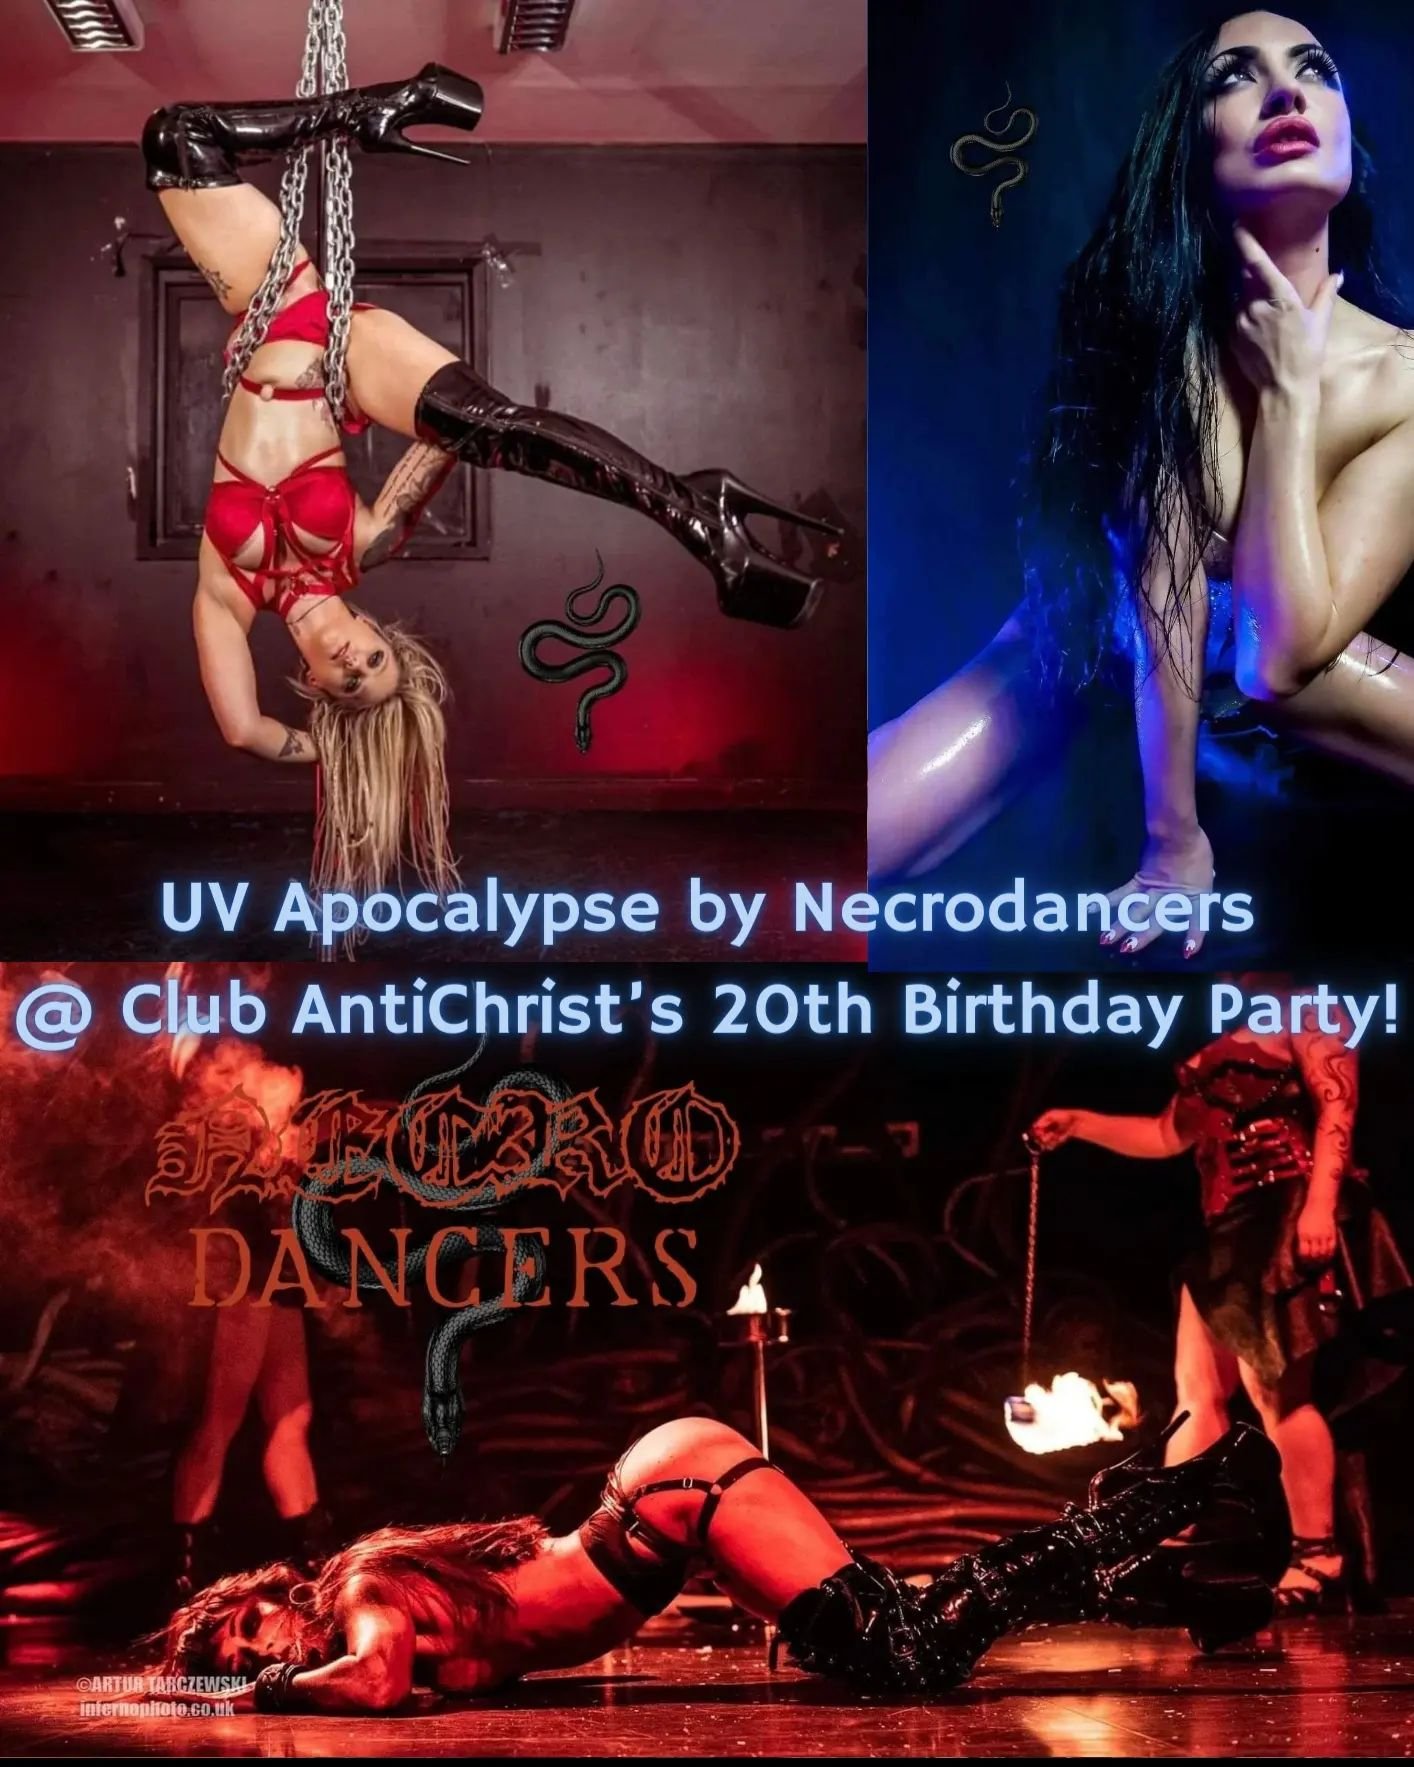 We're very excited to announce that we have Necrodancers performing &quot;UV Apocalypse&quot; at the next AC!
That's Miss Fortune, Sarah Blackmilk and Bliss Rogue together on stage for one EPIC show!

They join V2A, Satan's Strip Show and MORE tba...